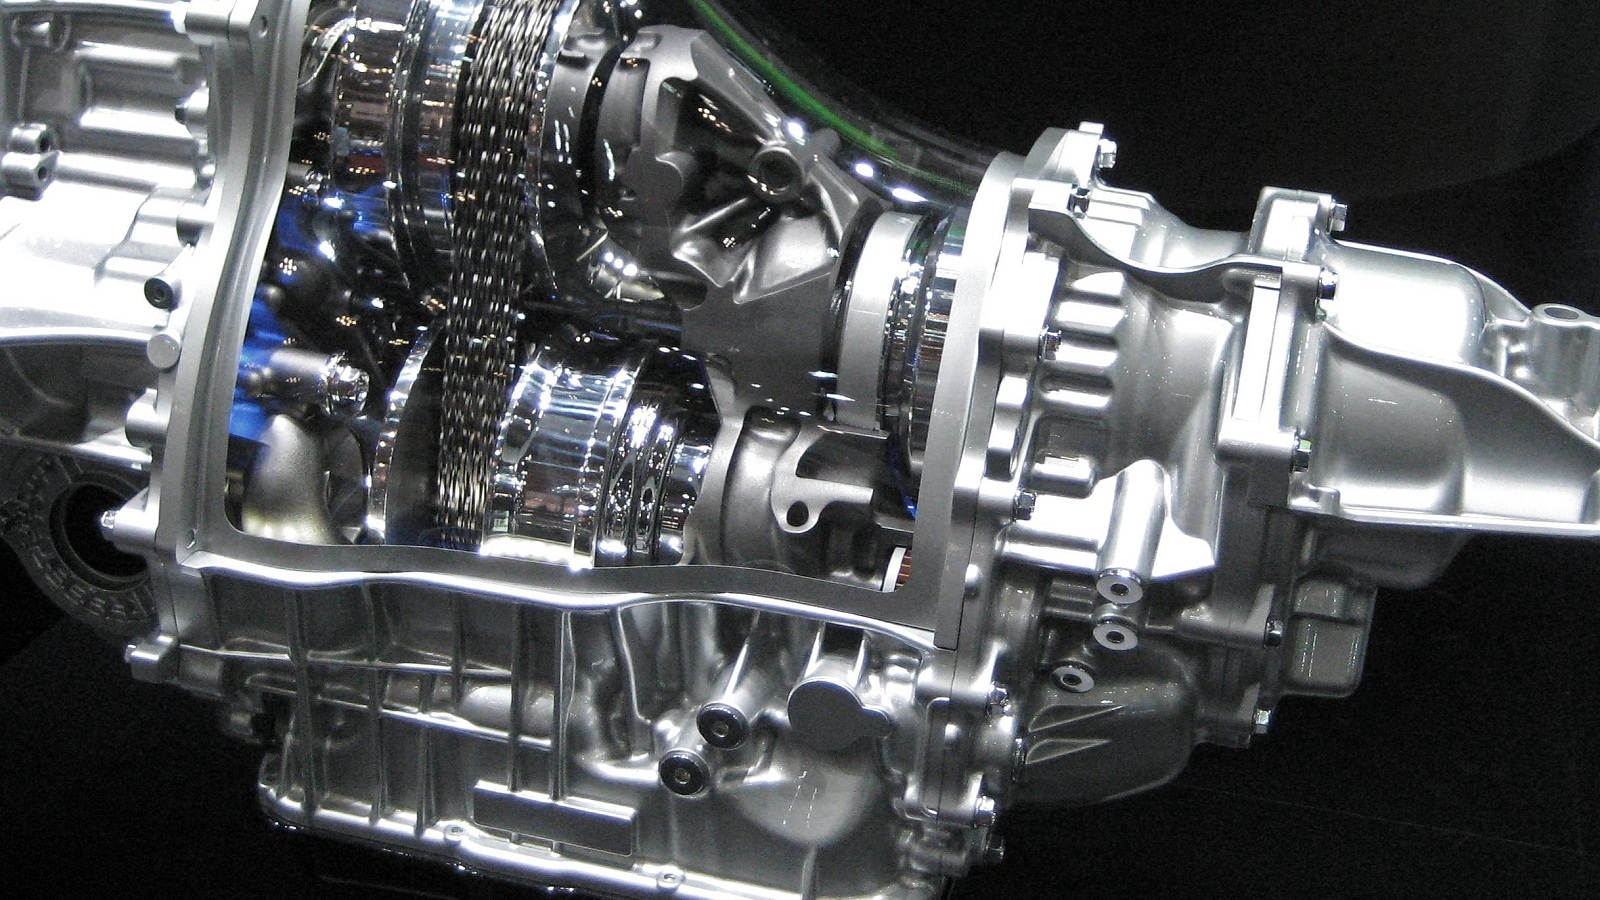 Subaru LinearTronic continuously variable transmission (CVT)